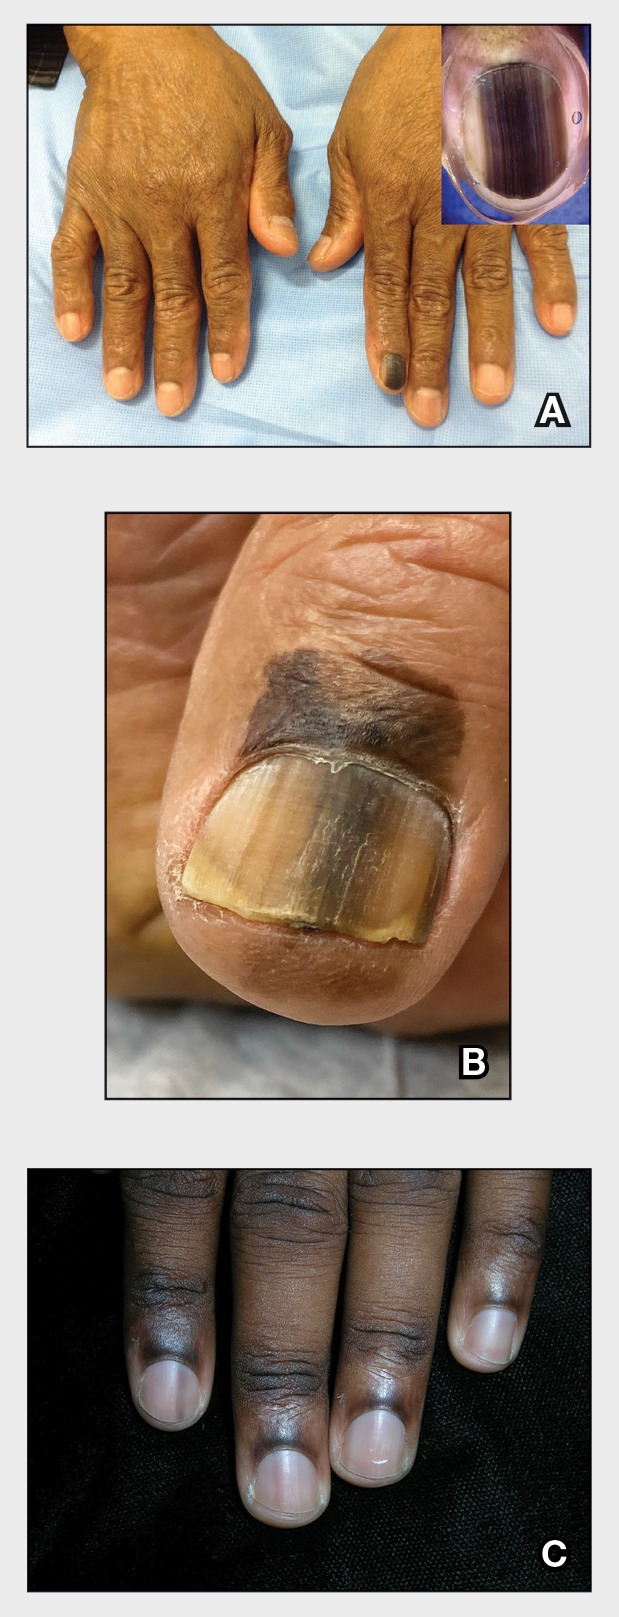 What Are These Hyperpigmented Bands on the Fingernails?